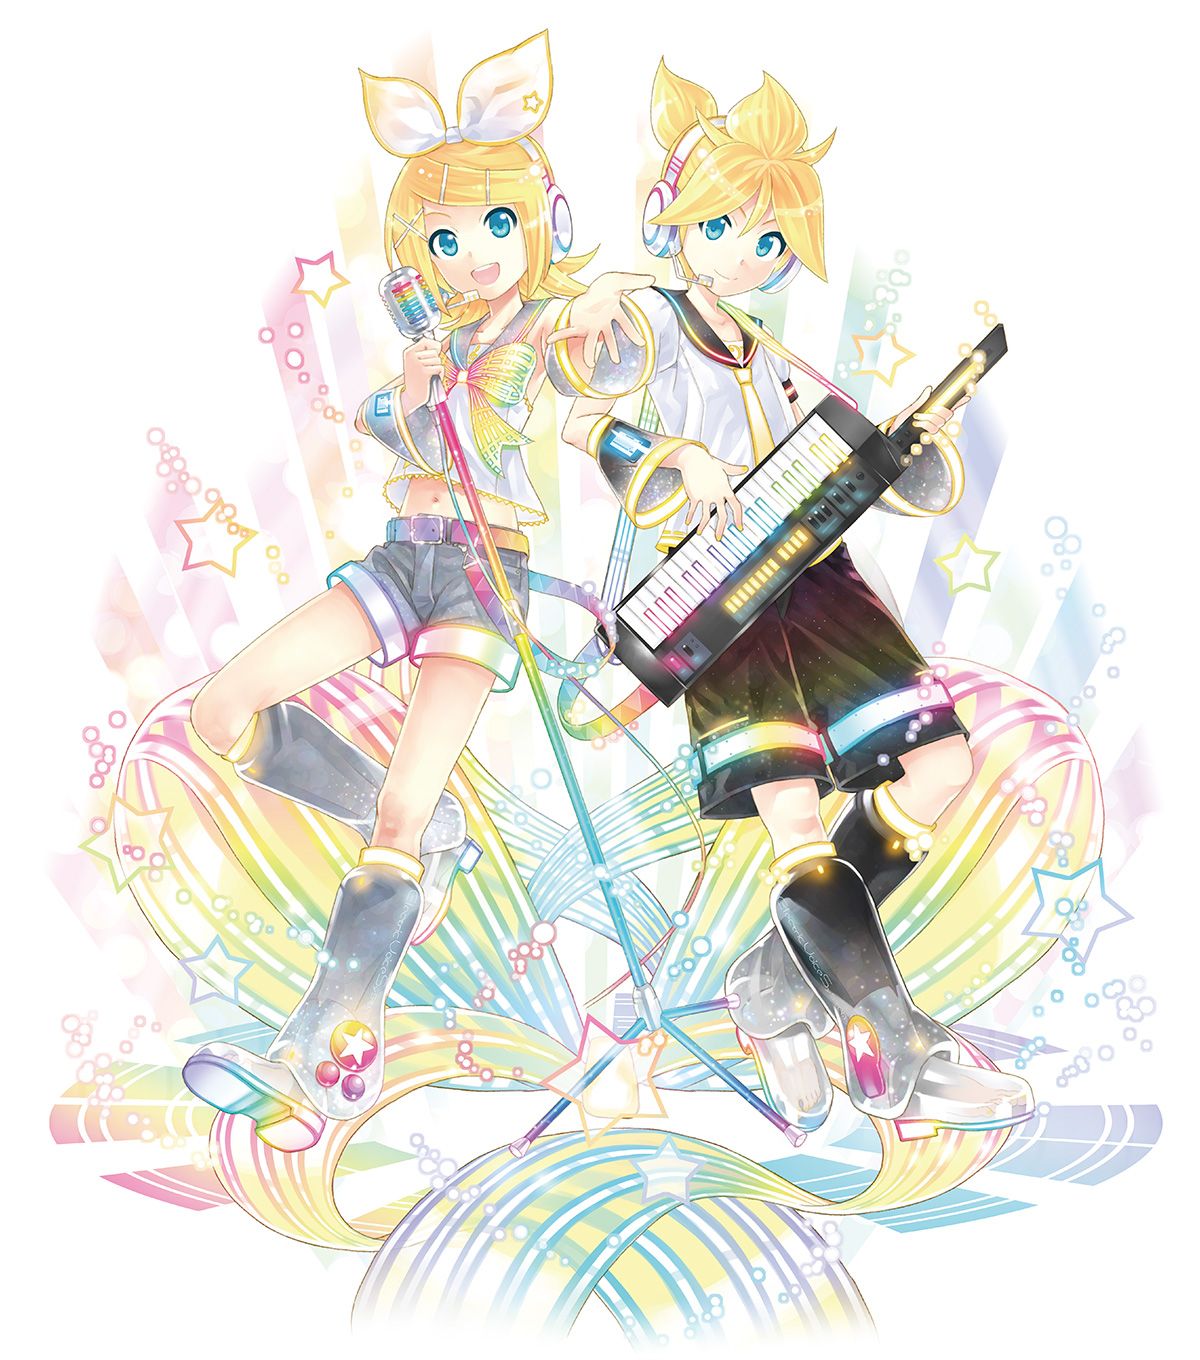 1boy 1girl belt blonde_hair blue_eyes bow detached_sleeves feet full_body hair_bow hair_ornament hairclip headphones headset highres instrument kagamine_len kagamine_rin kei_(keigarou) keytar leg_warmers looking_at_viewer microphone_stand navel necktie official_art outstretched_hand rainbow_gradient ribbon sailor_collar see-through shorts simple_background star toes vocaloid yellow_neckwear